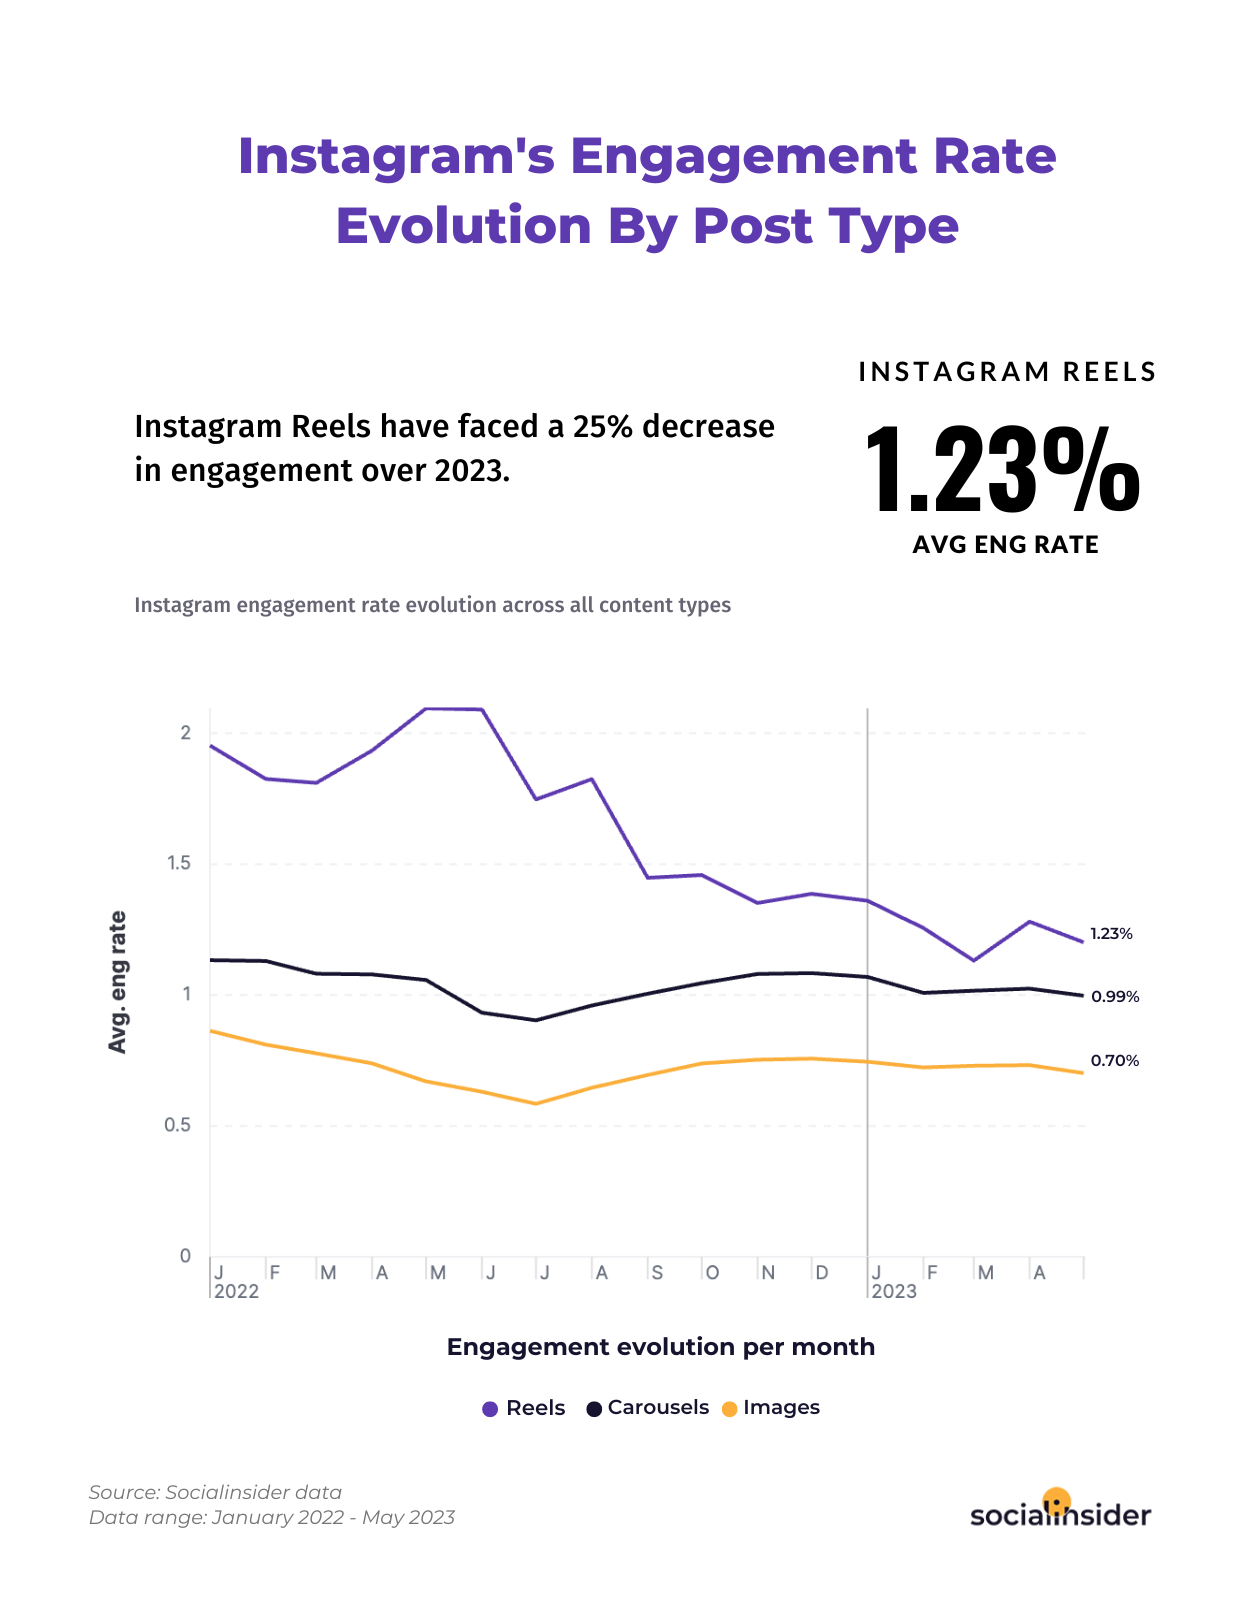 A line graph outlining the evolution of engagement rates for different instagram content types (Reels, carousels, images) from 2022 to 2023.